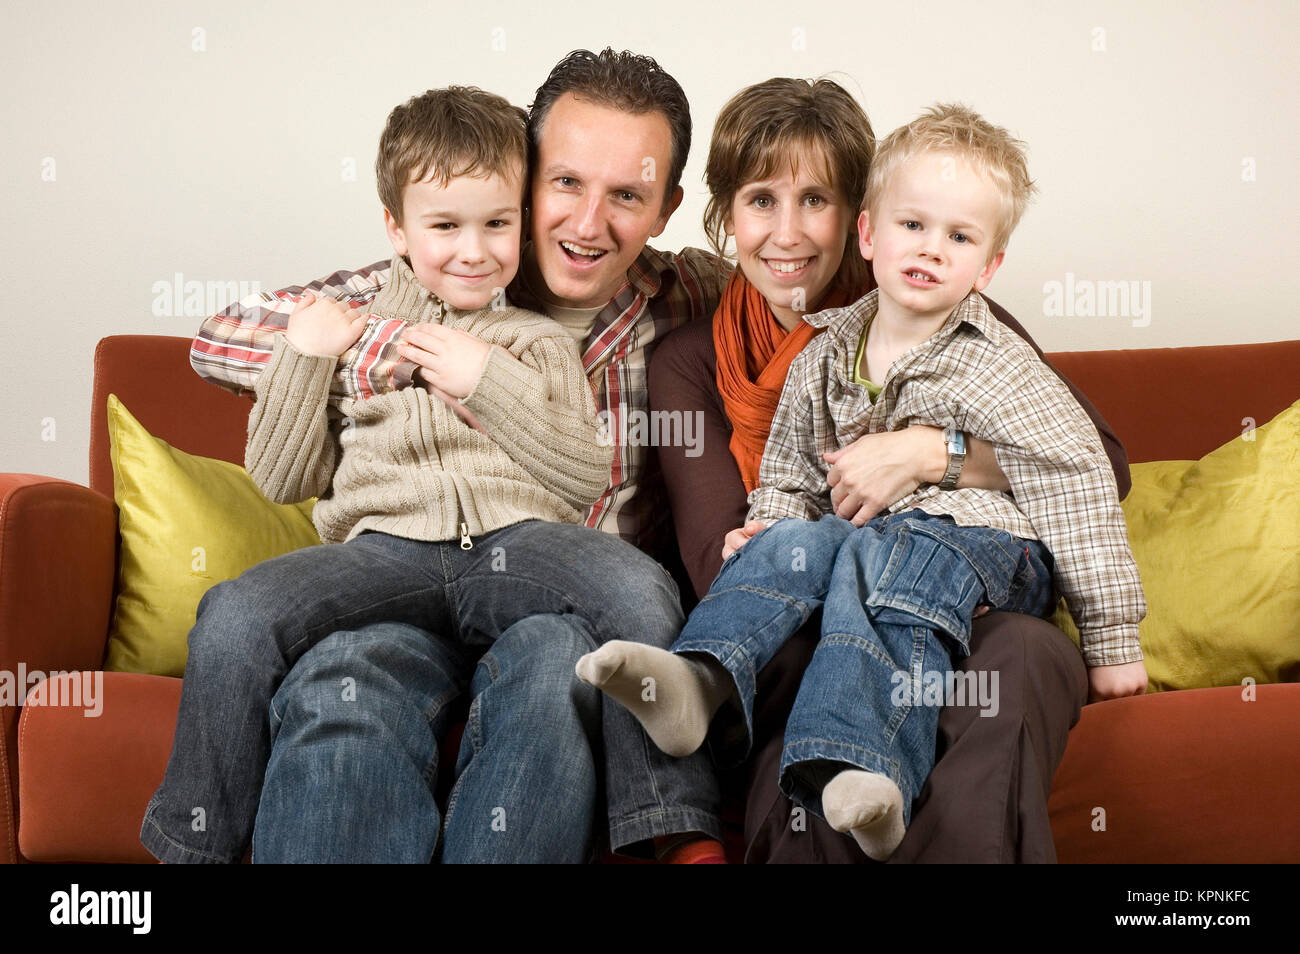 Family On A Couch 2 Stock Photo